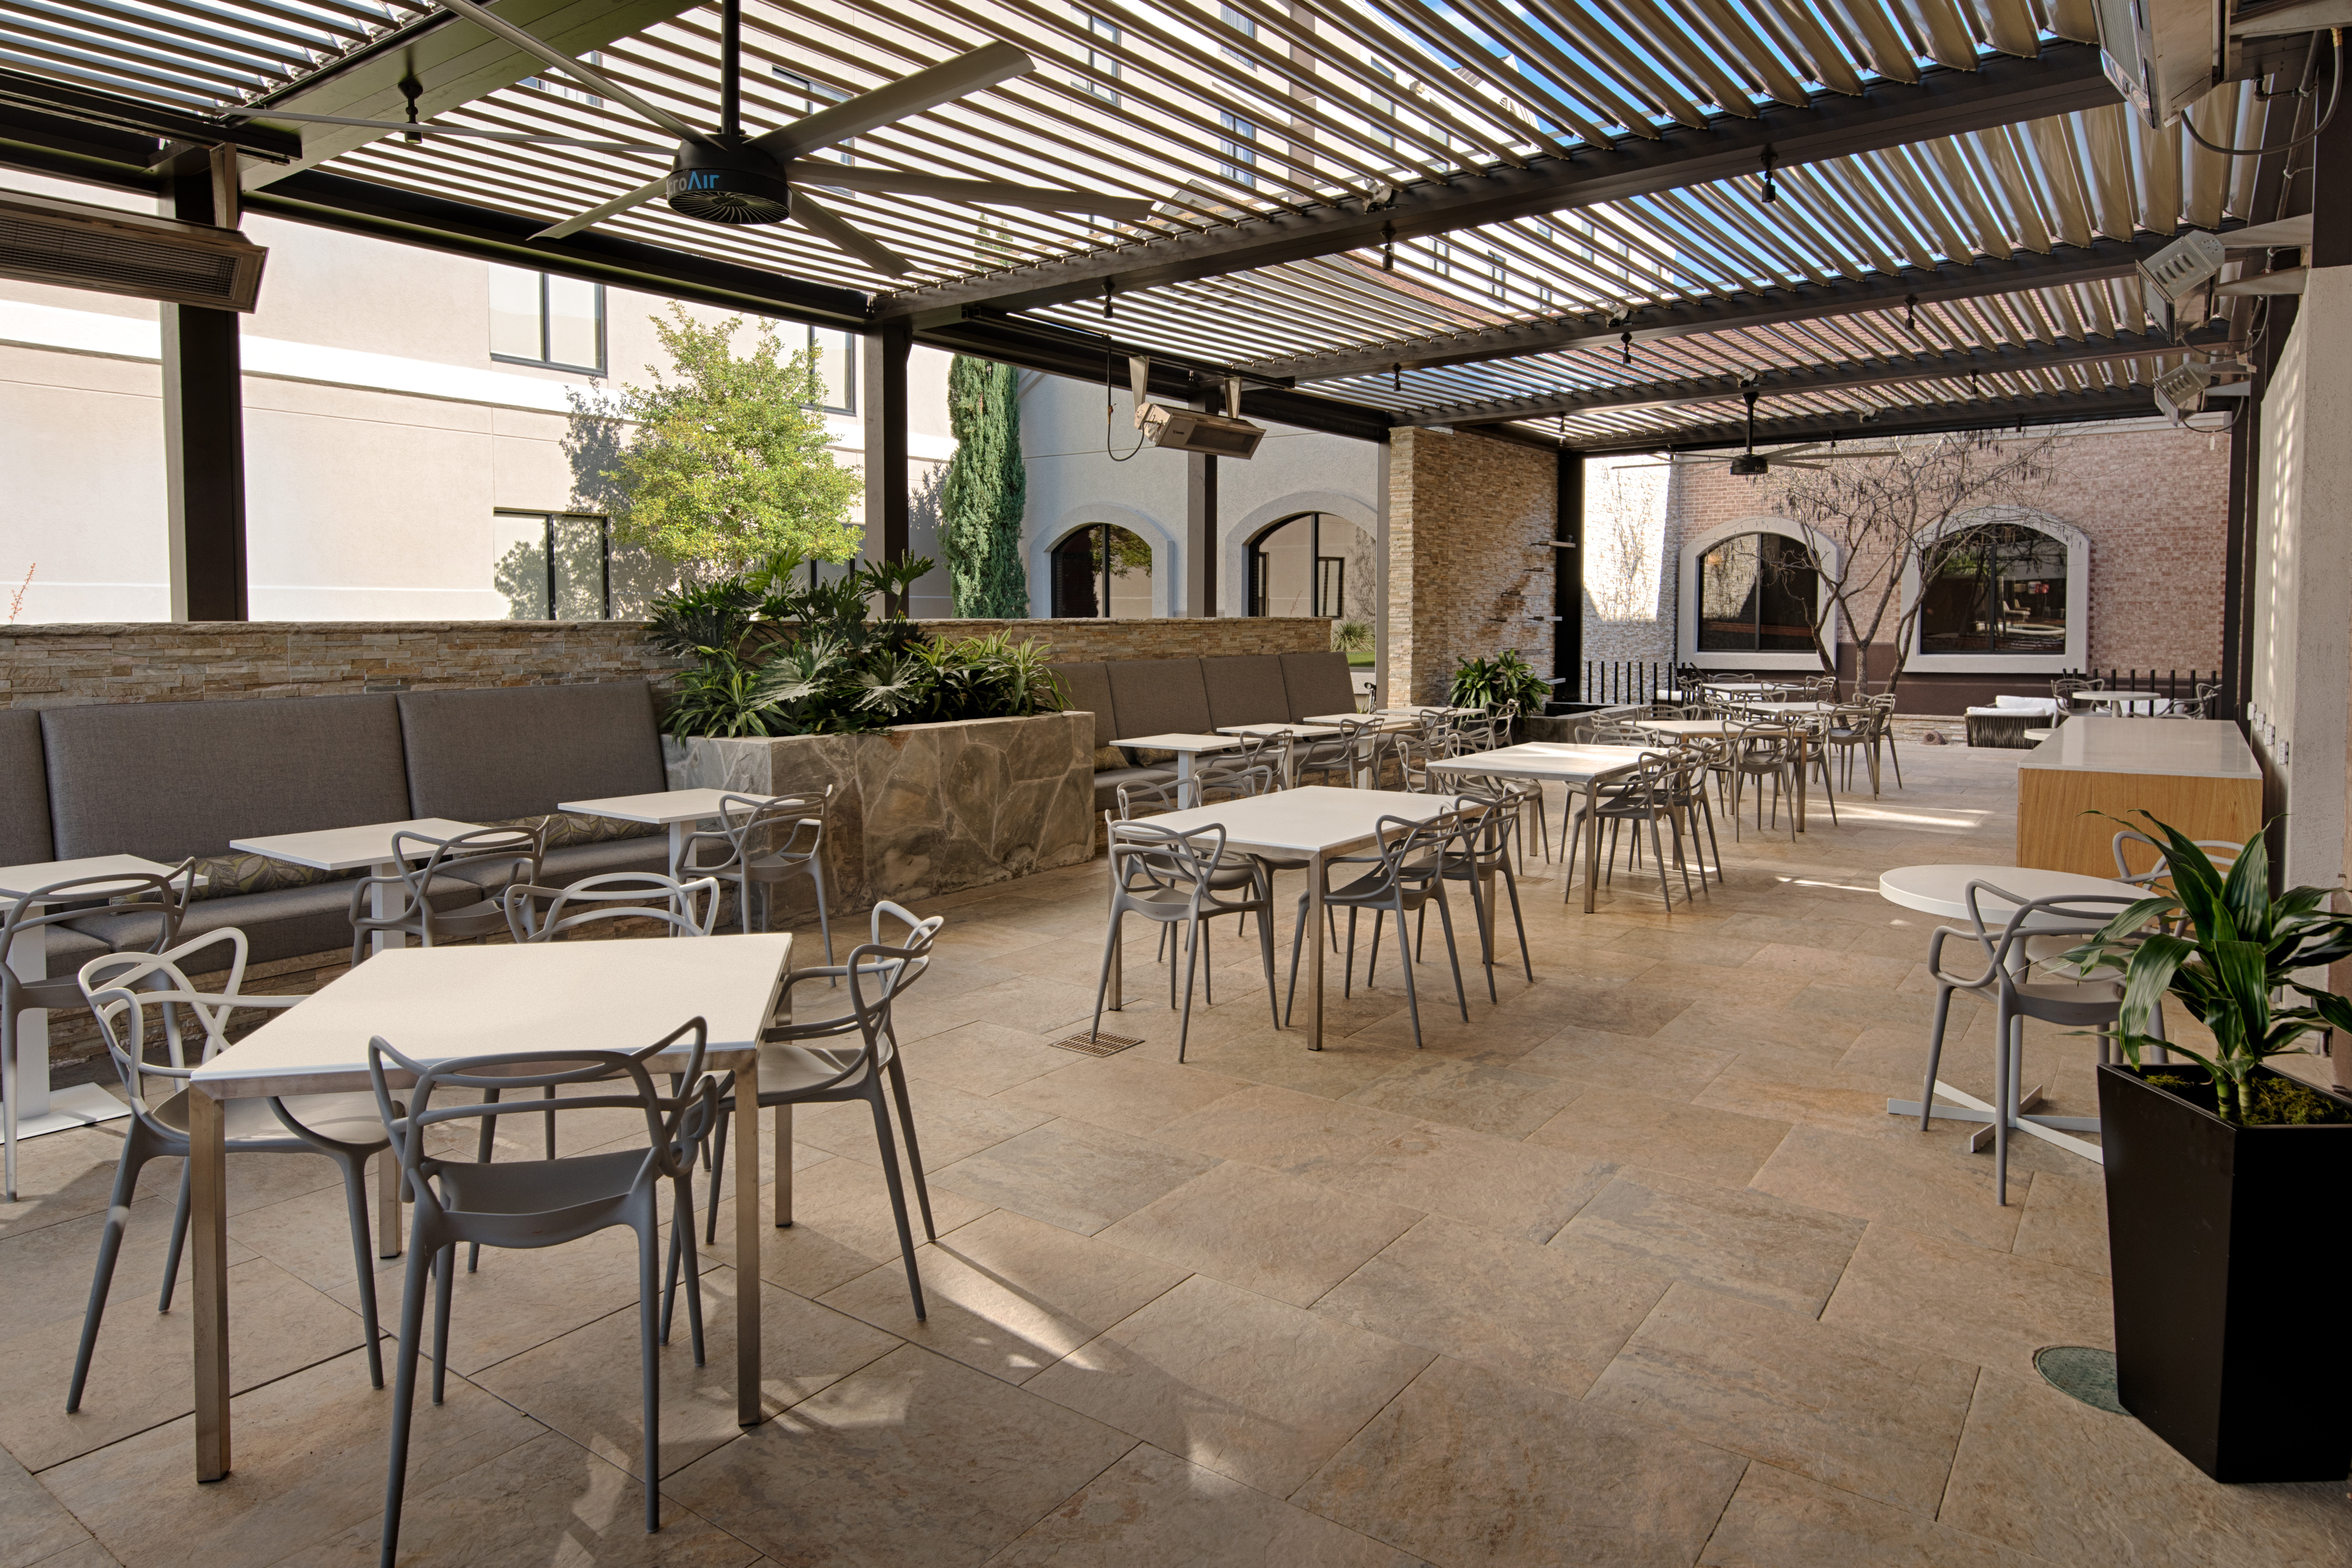 Outdoor Patio Seating Area with Tables and Chairs